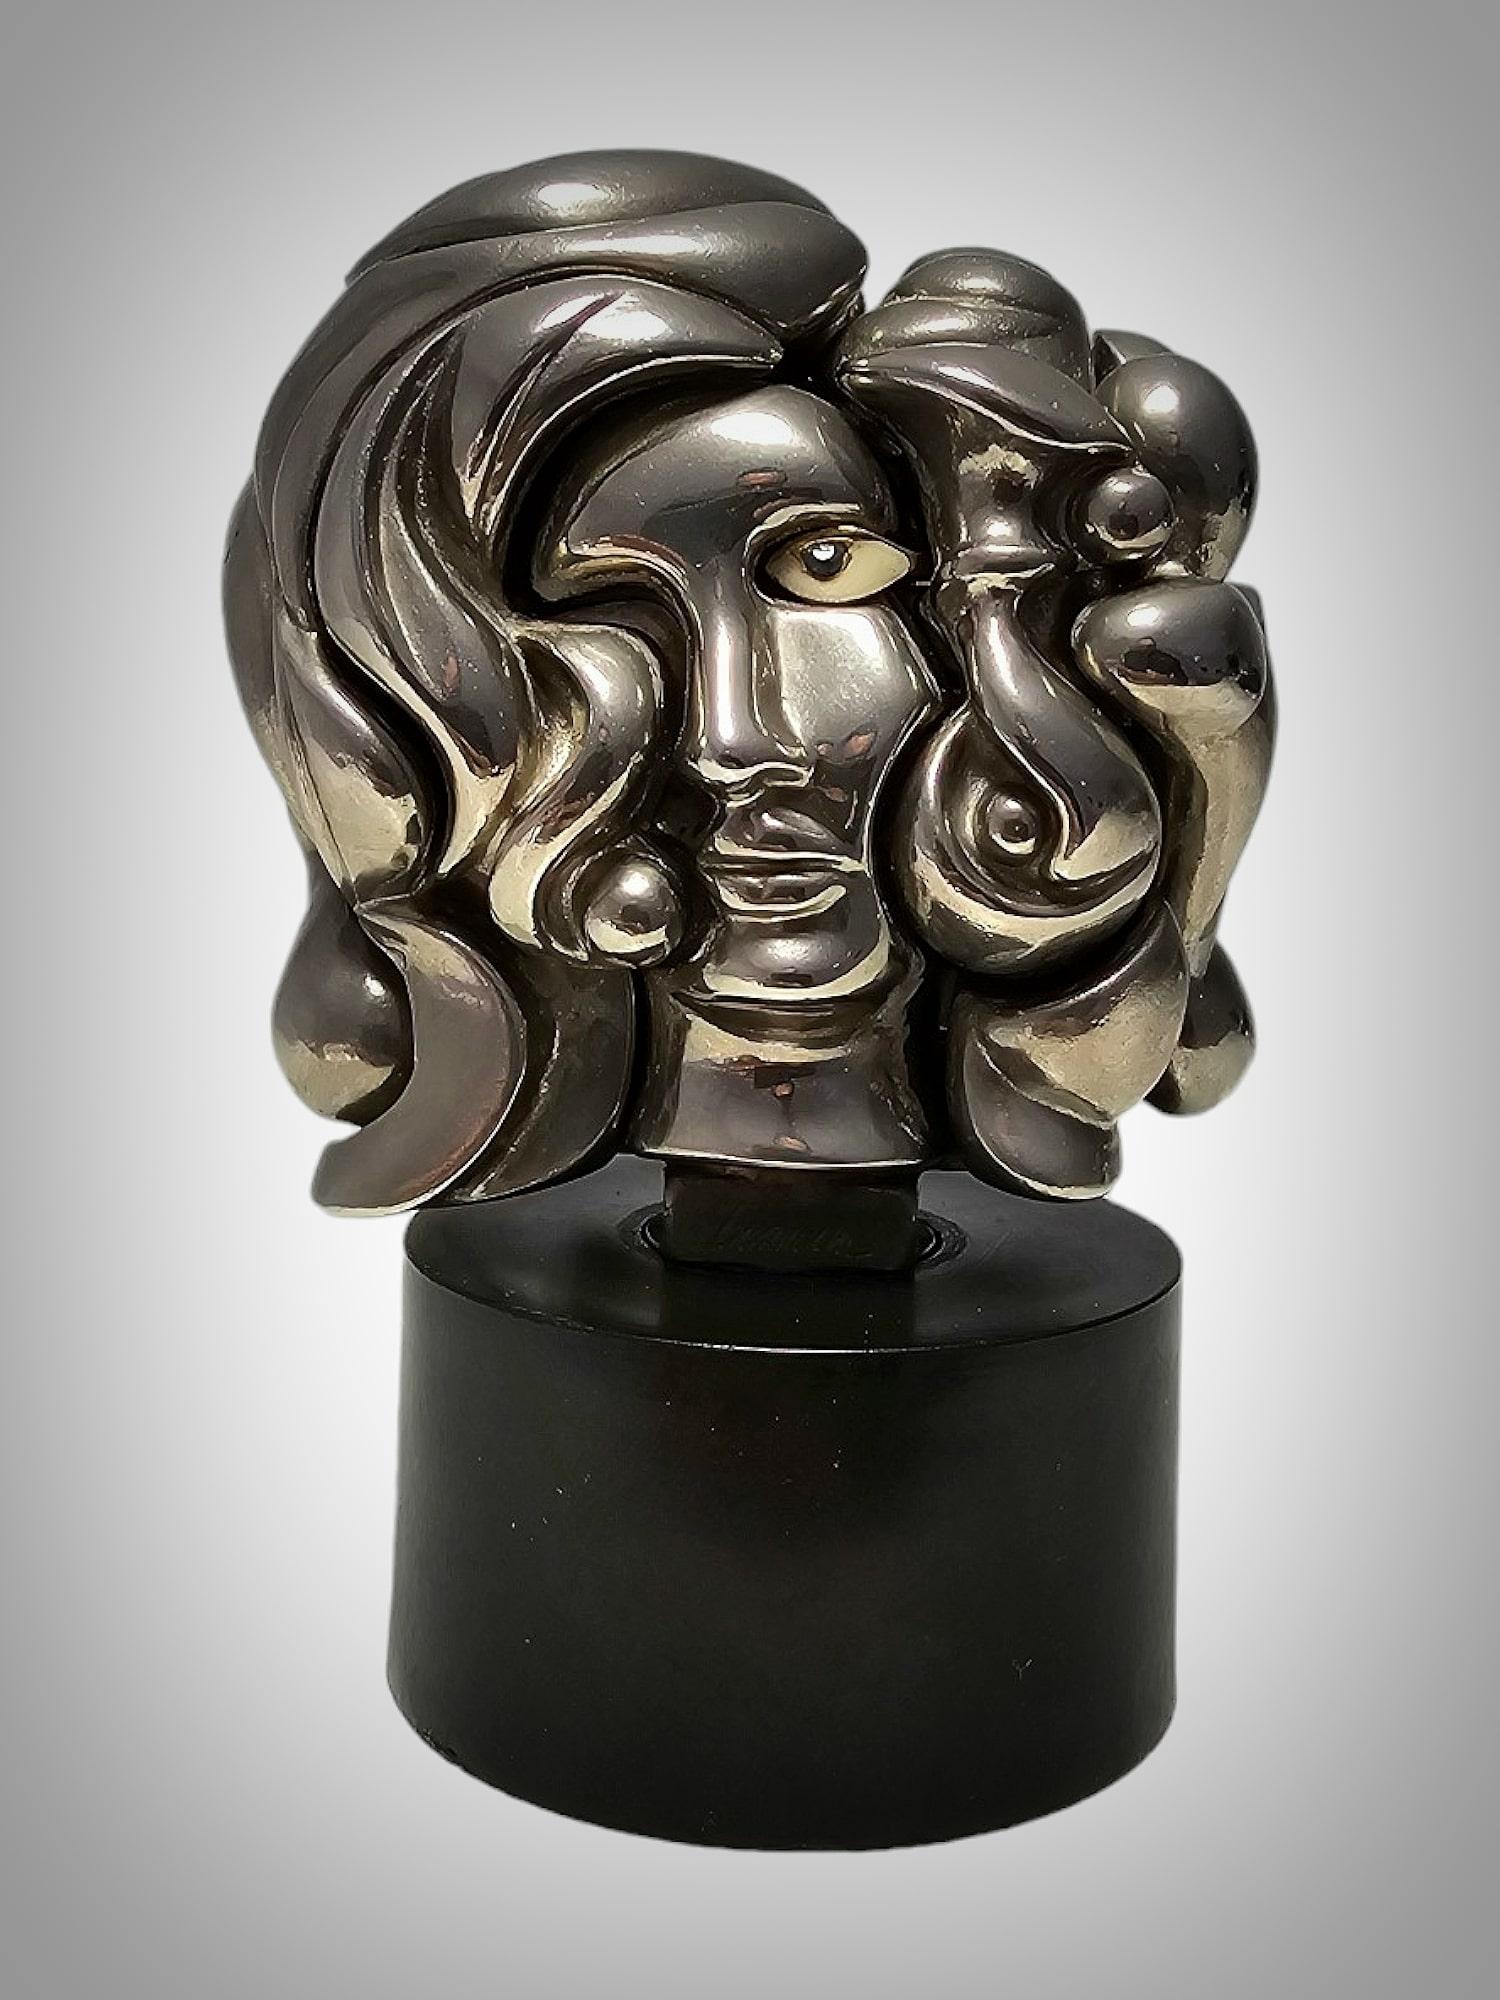 This wonderful vintage mini Miguel Berrocal puzzle element sculpture of the bust of a woman called Portrait de Michelle is comprised of 17 individual components. It is a puzzle of great craftsmanship done by a Spanish sculptor. It is three